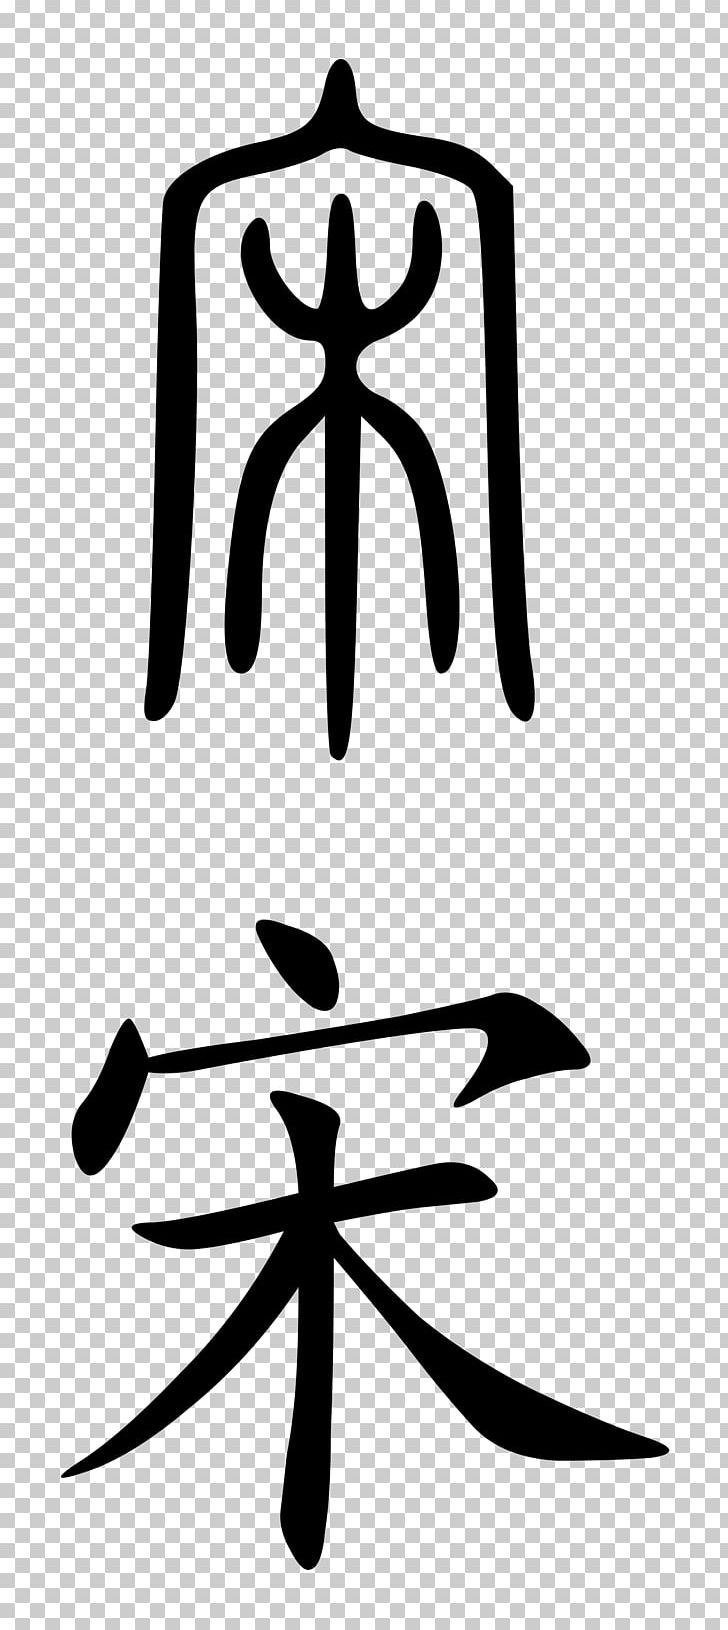 Chinese Characters Oracle Bone Script 漢字の起源 Seal Script Writing System PNG, Clipart, Black And White, Chinese, Chinese Bronze Inscriptions, Chinese Characters, Chinese Family Free PNG Download